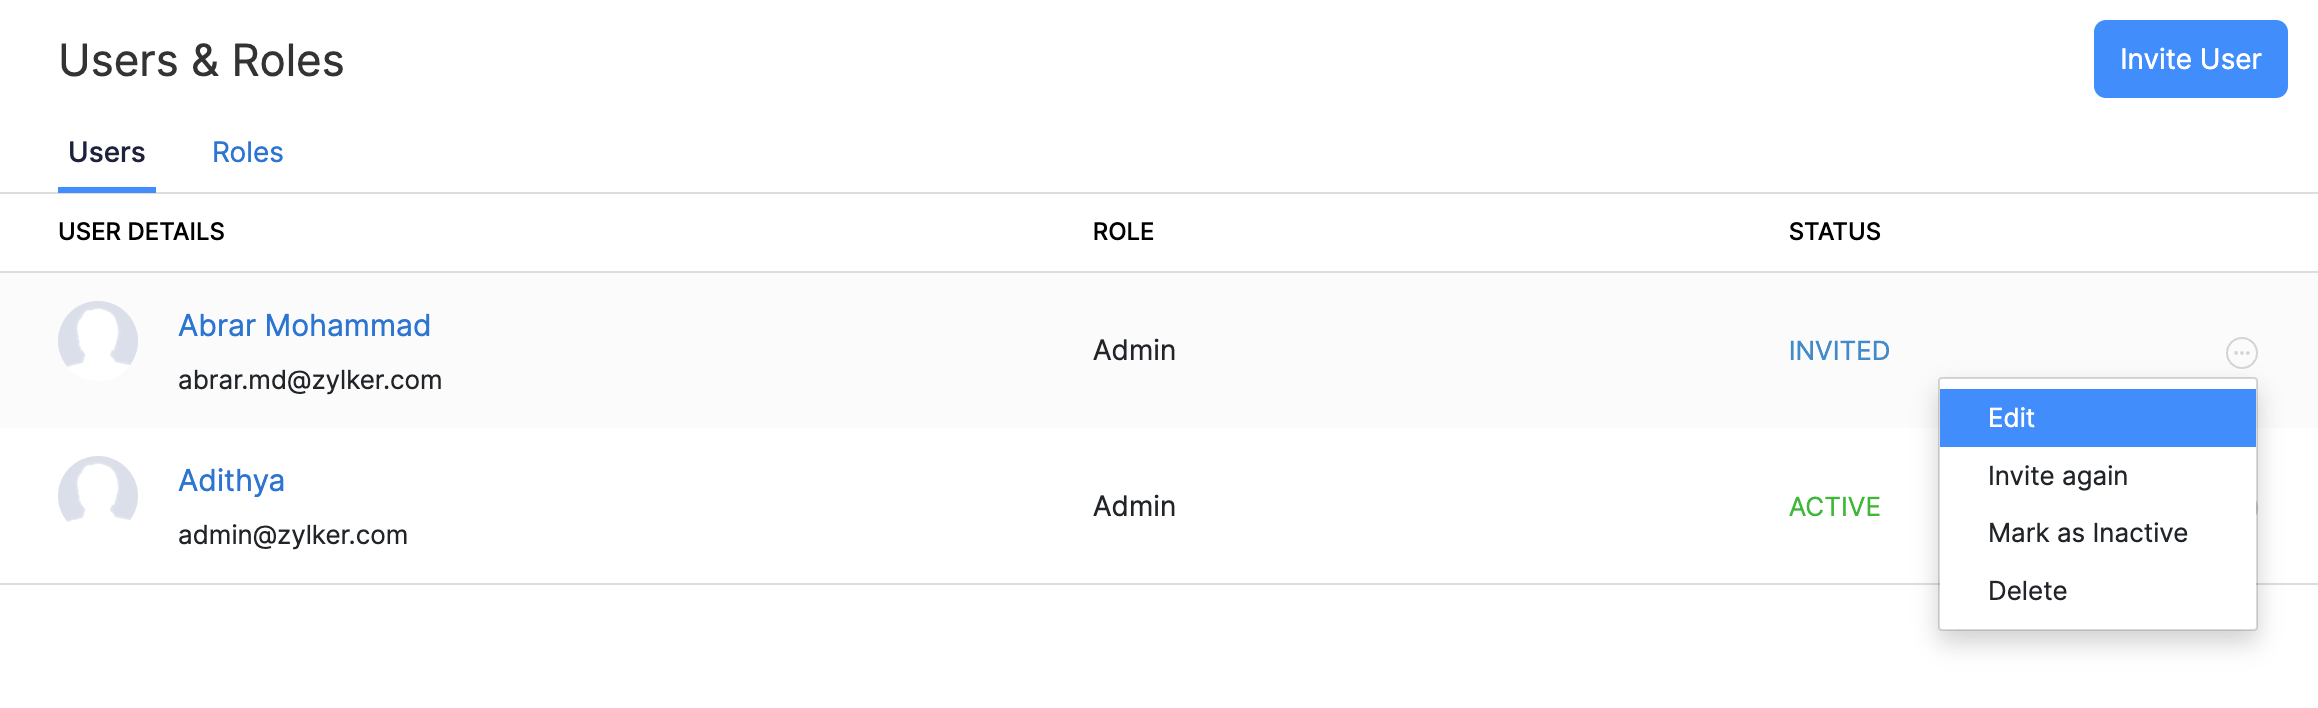 Users and Roles